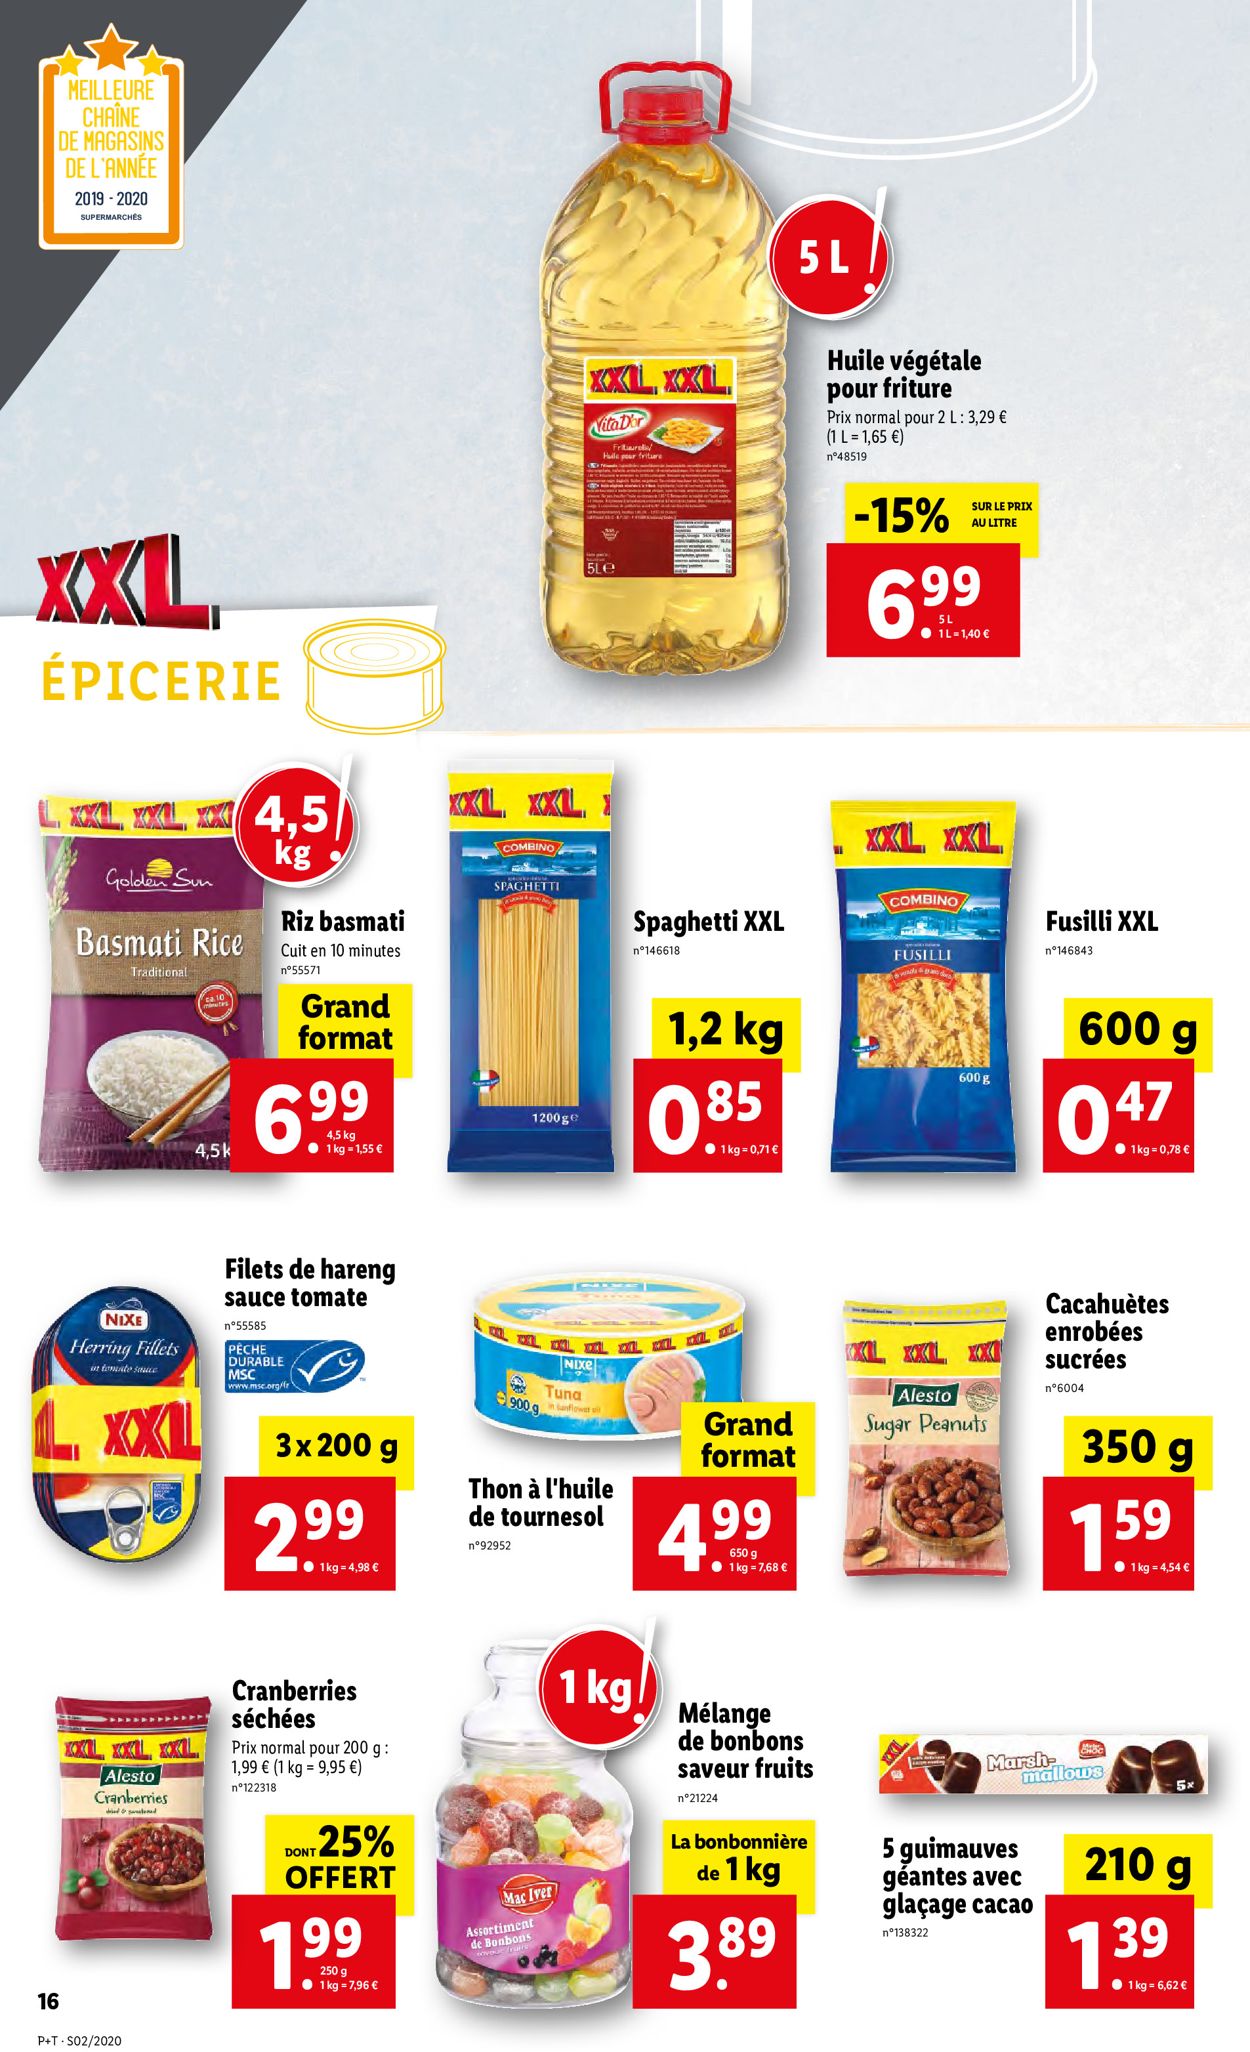 Lidl Catalogue - 08.01-14.01.2020 (Page 16)